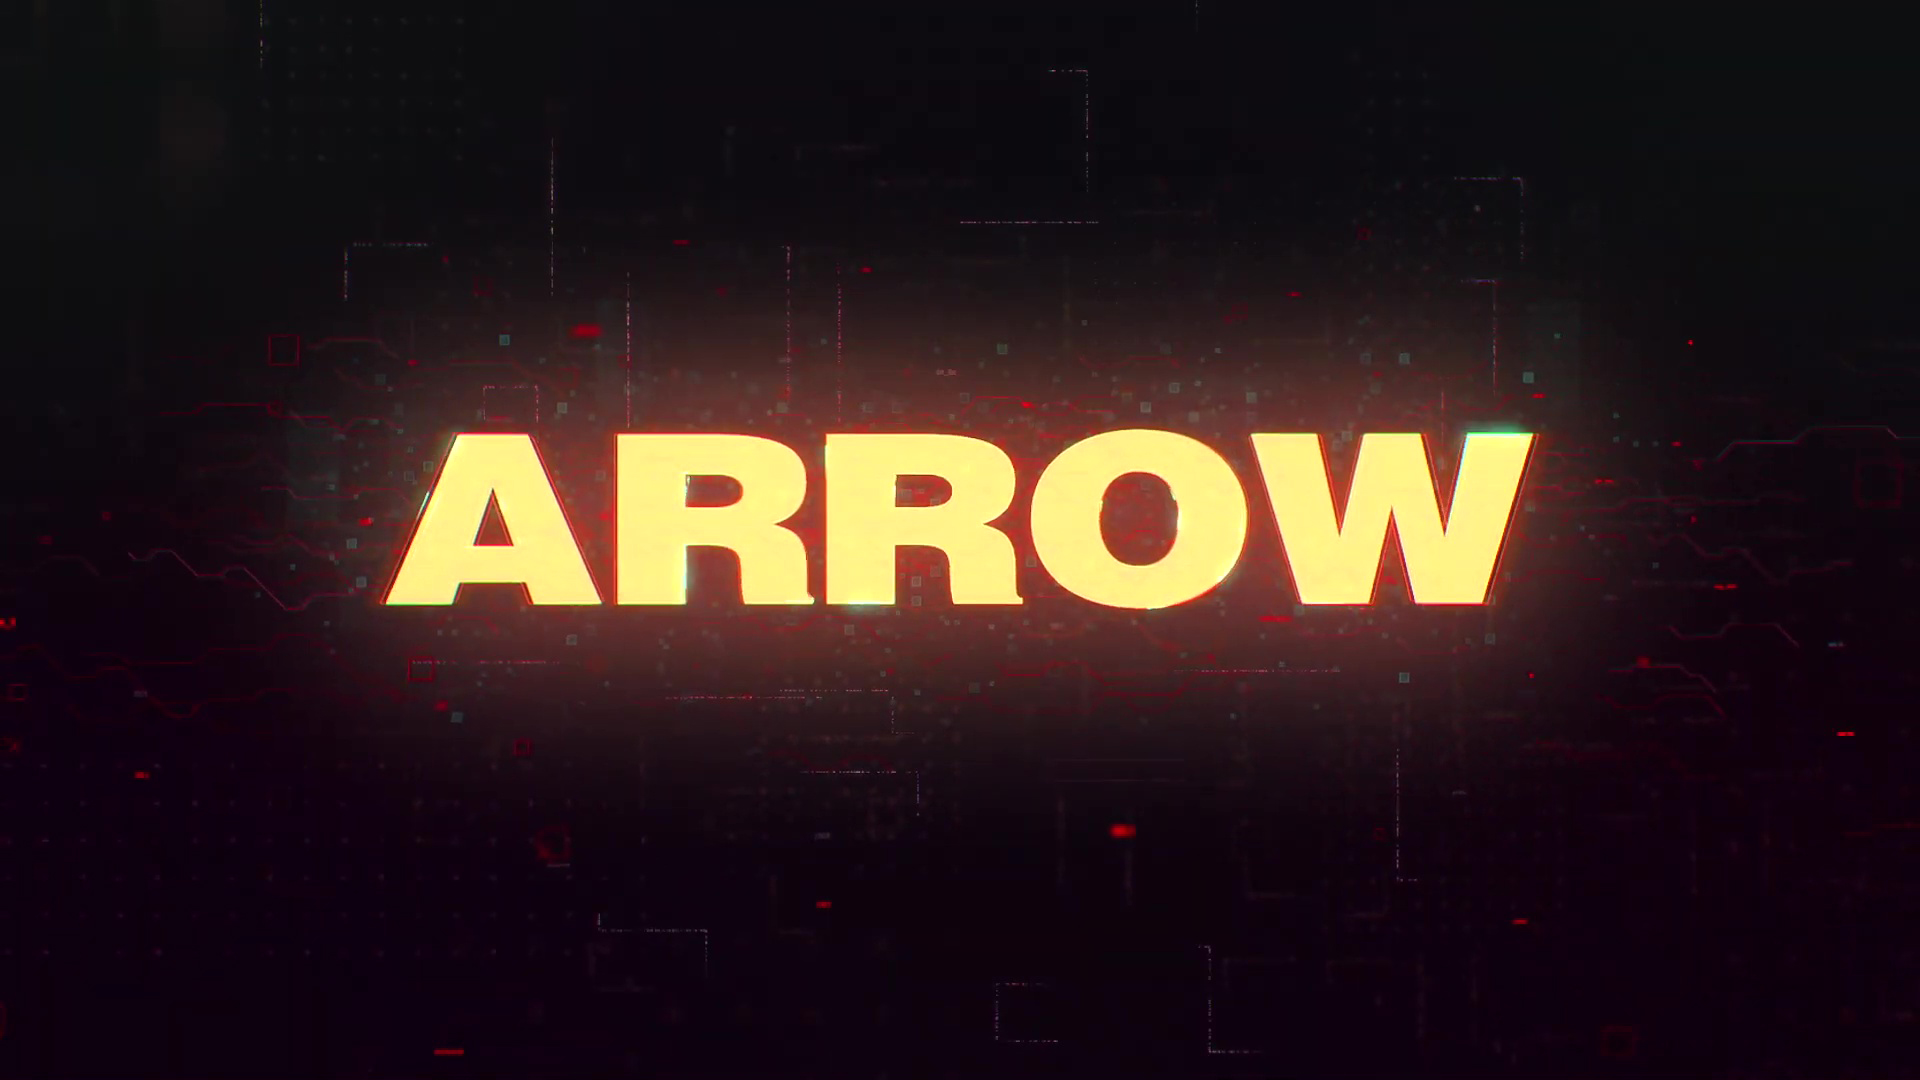 ARROW launches a VOD service packed with cult classics and the best in arthouse cinema